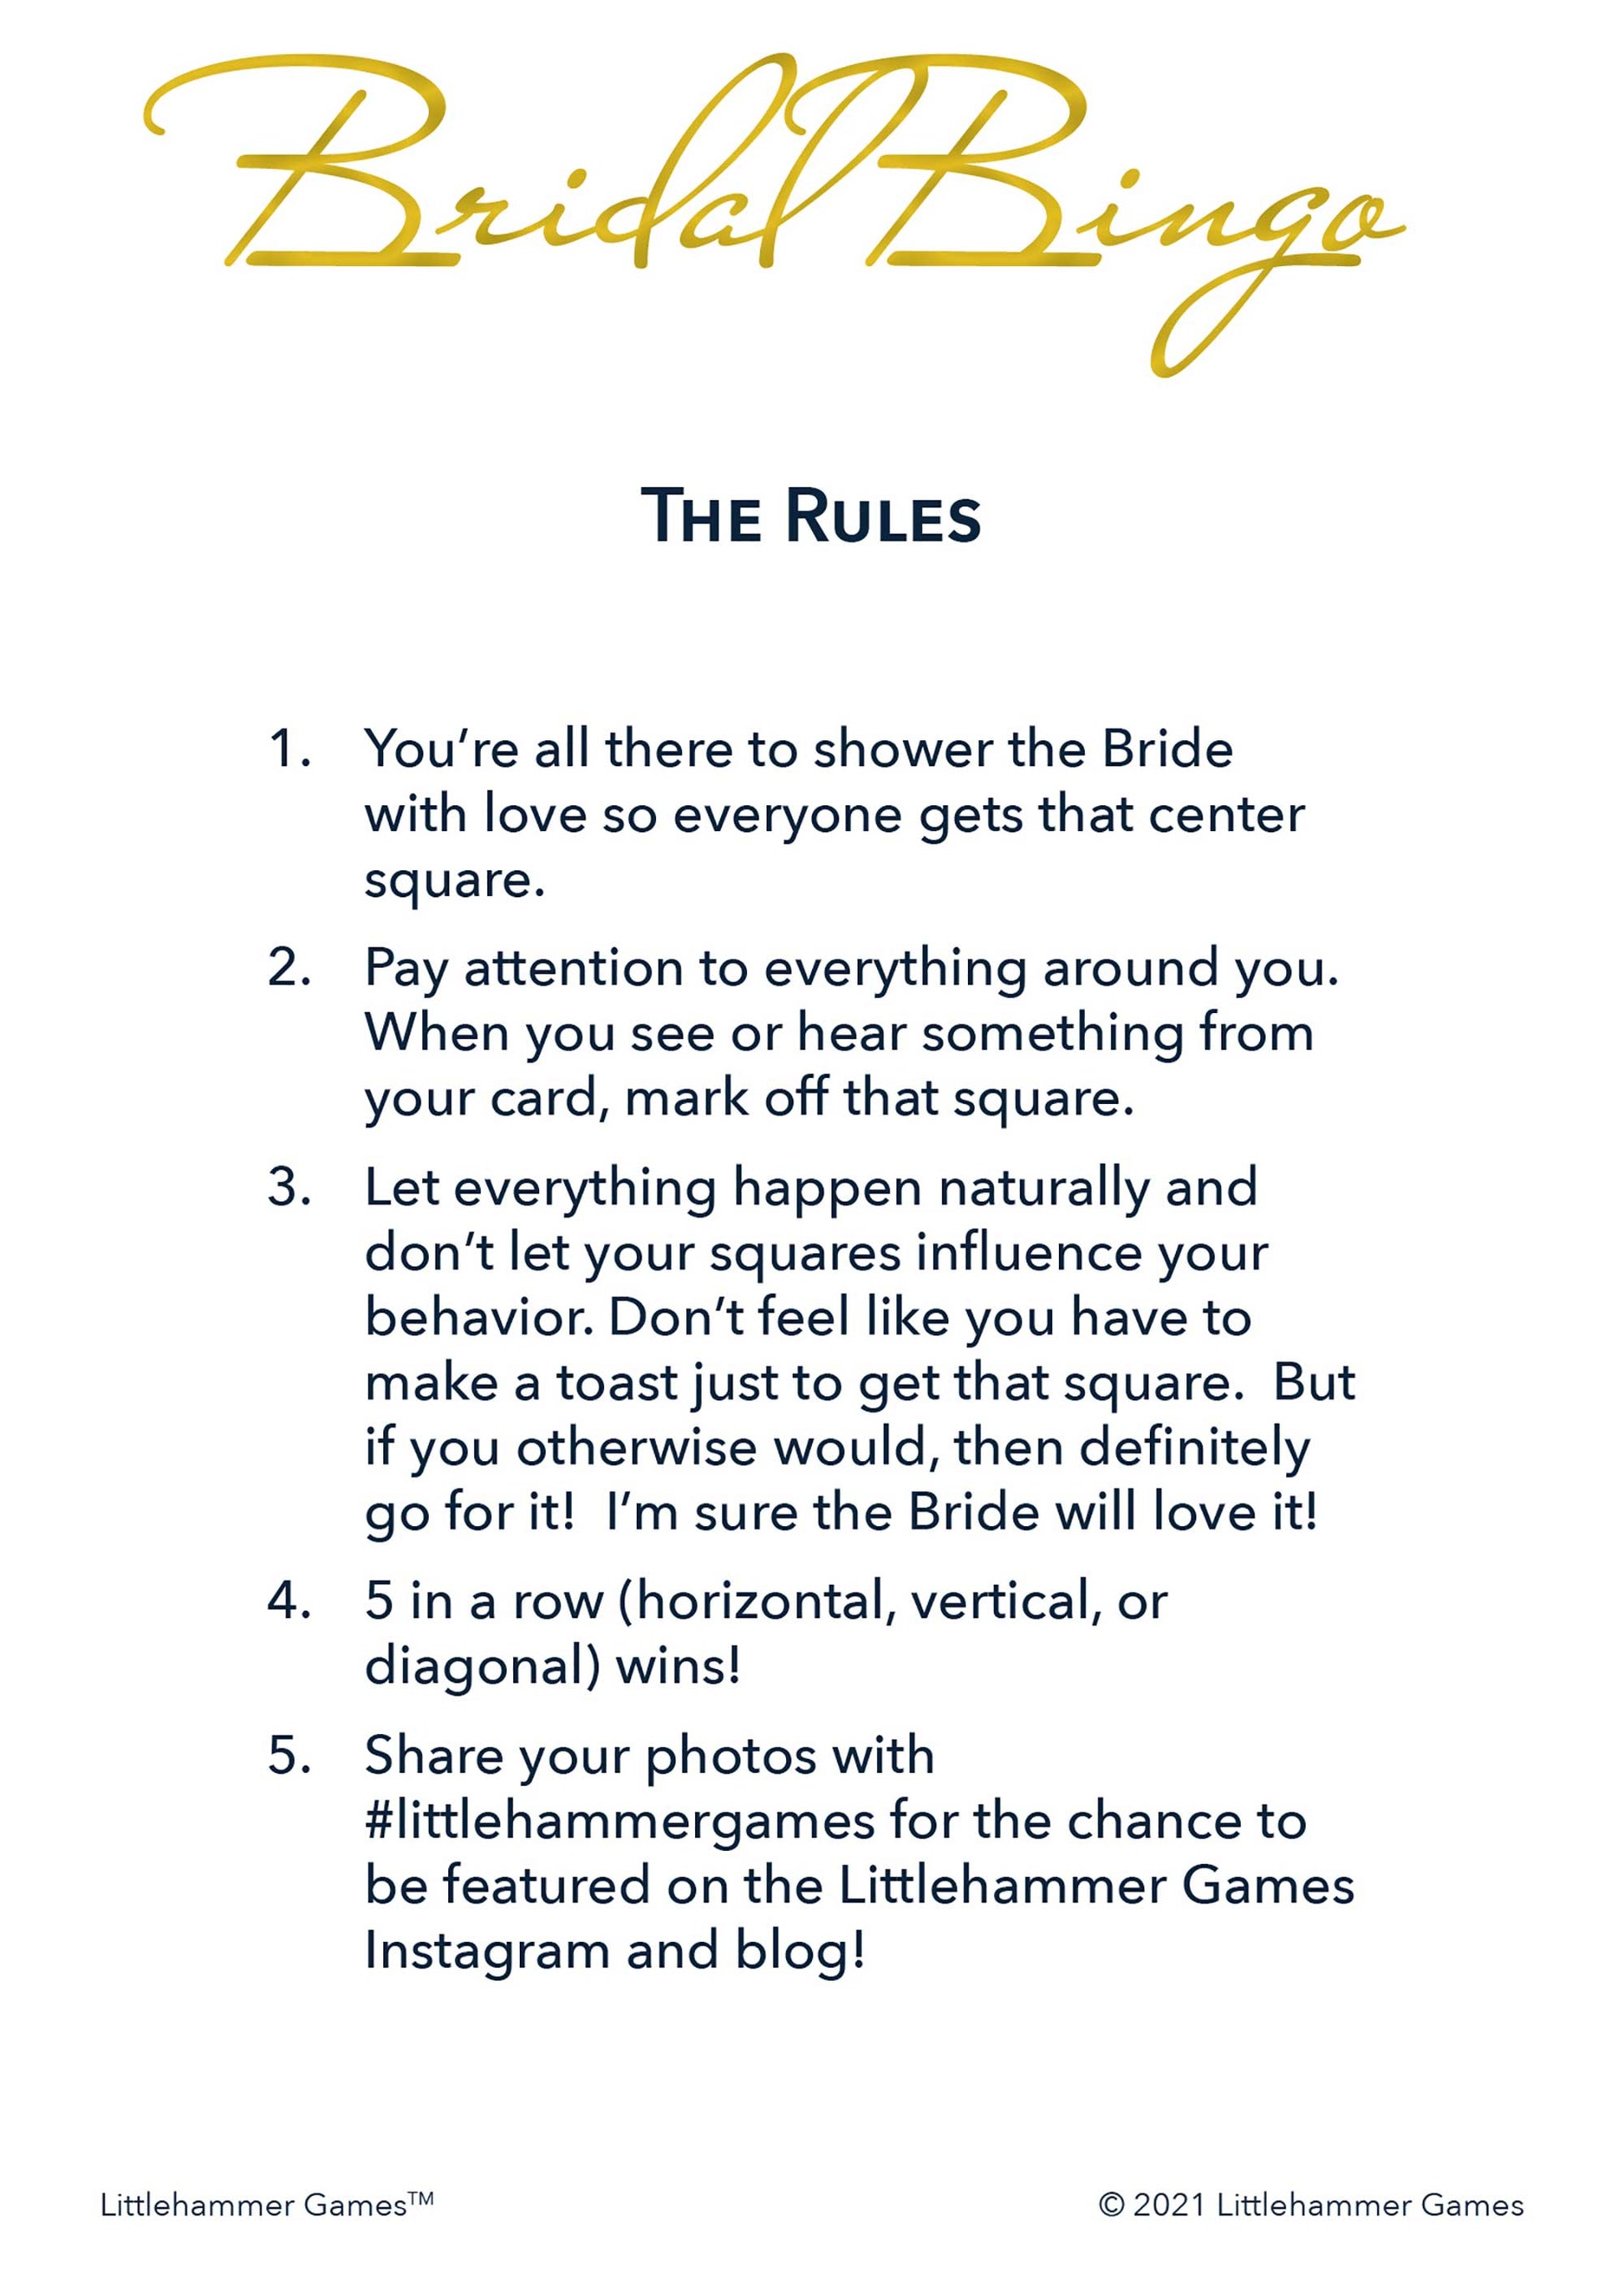 Bridal Bingo rules card with gold text on a white background